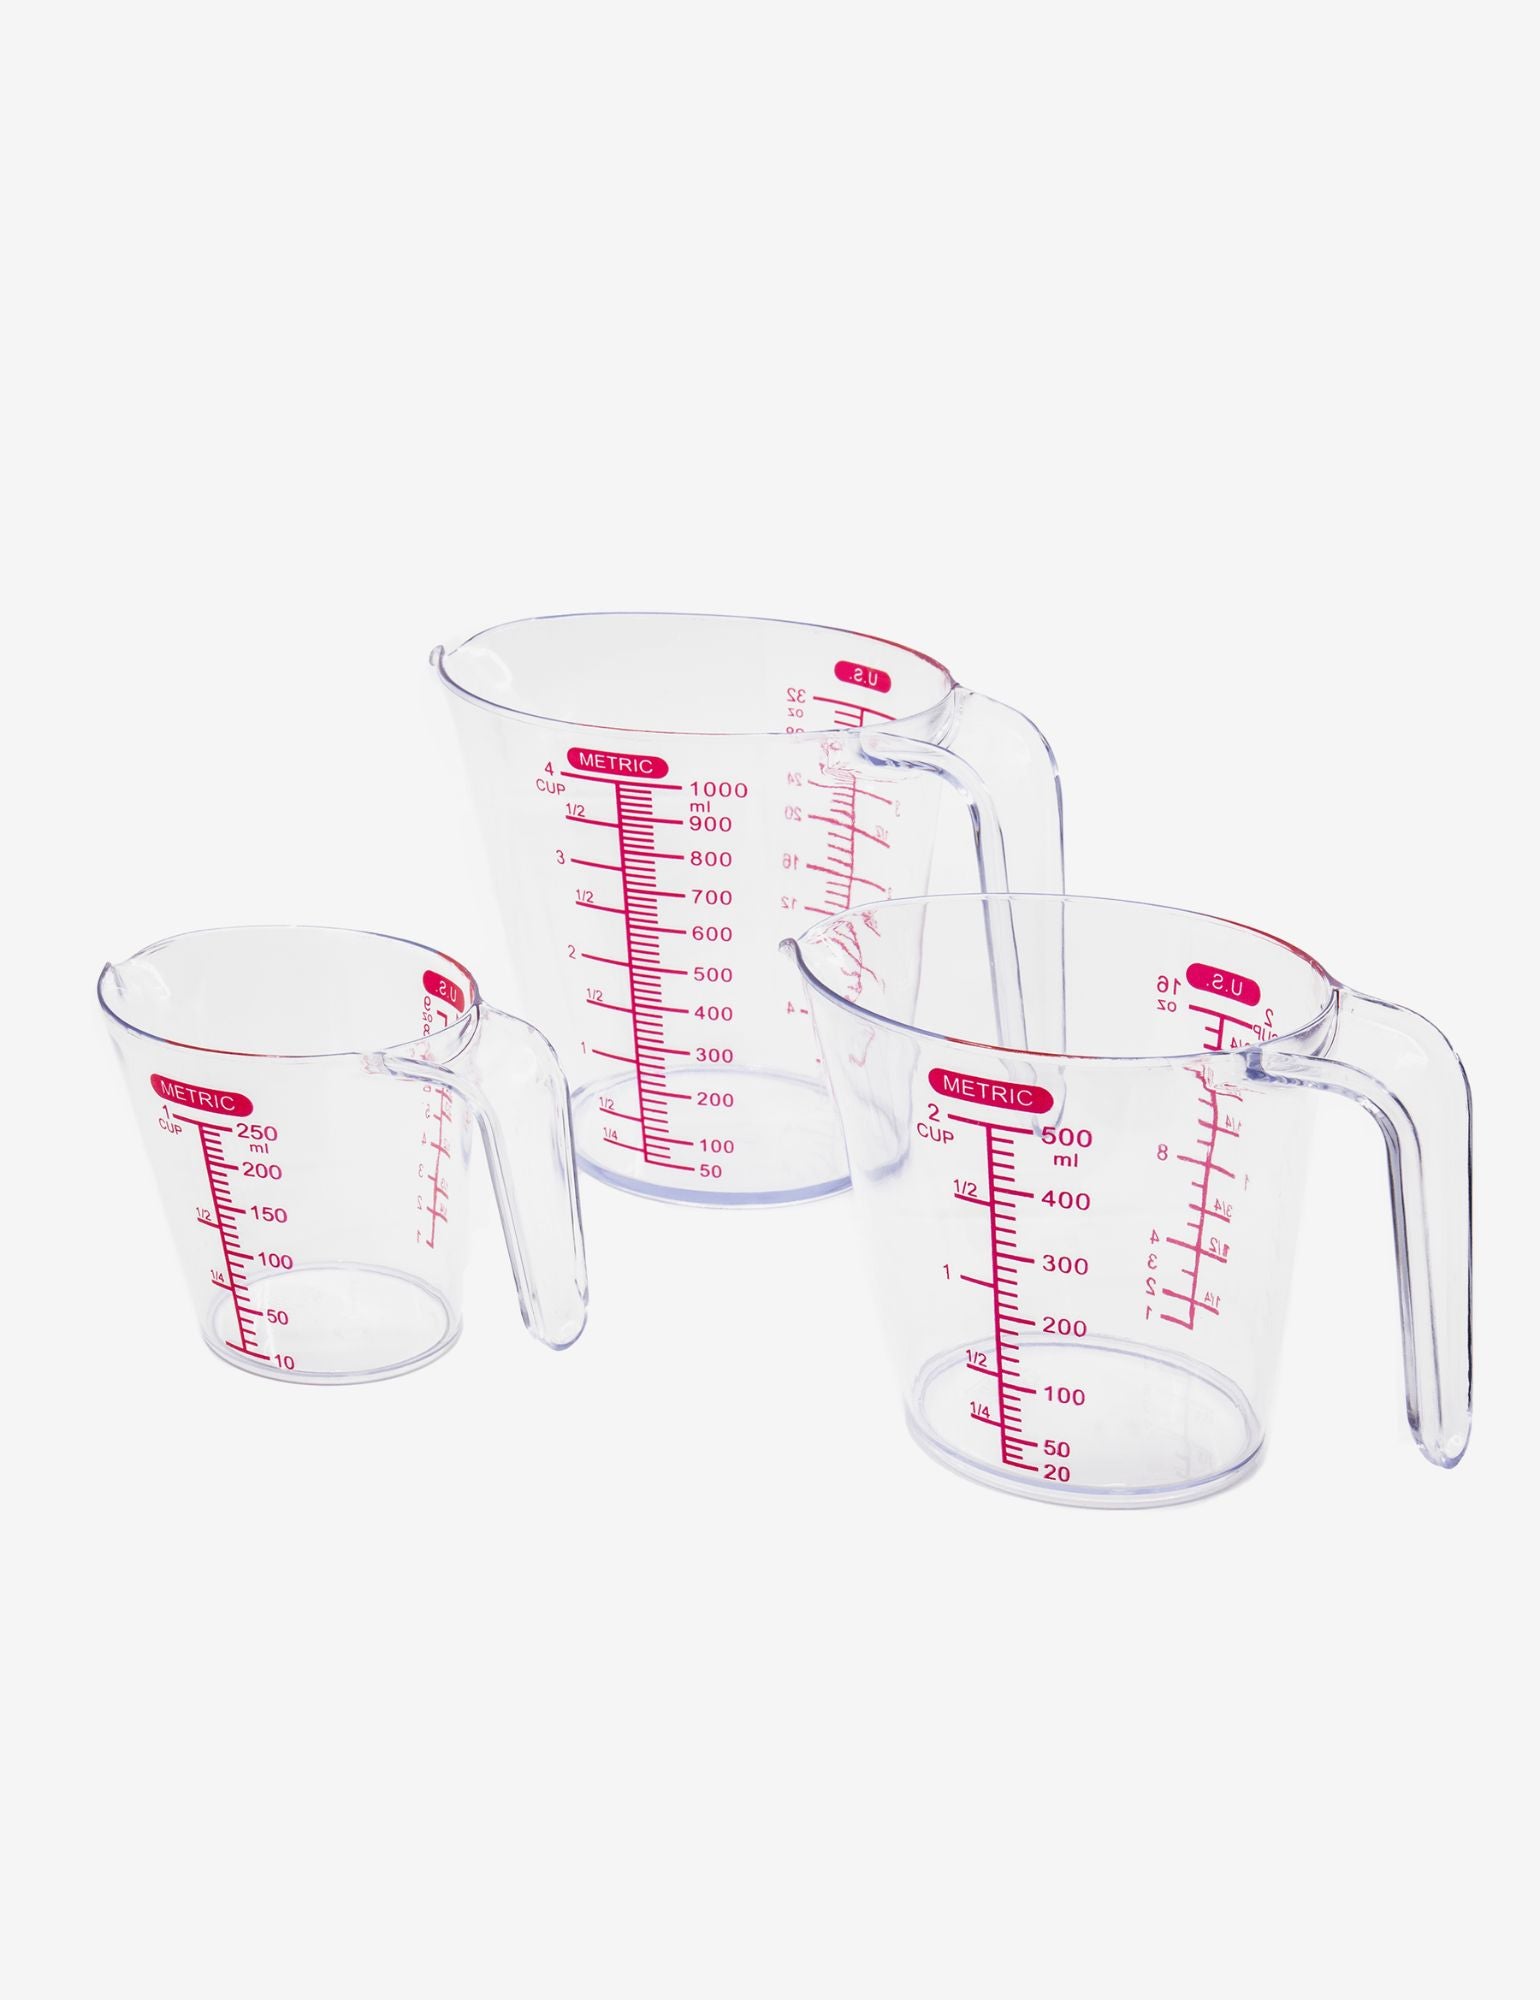 Home Basics Precise Pour 3 Piece Plastic Measuring Cup Set with Short Easy  Grip Handles, Clear, FOOD PREP